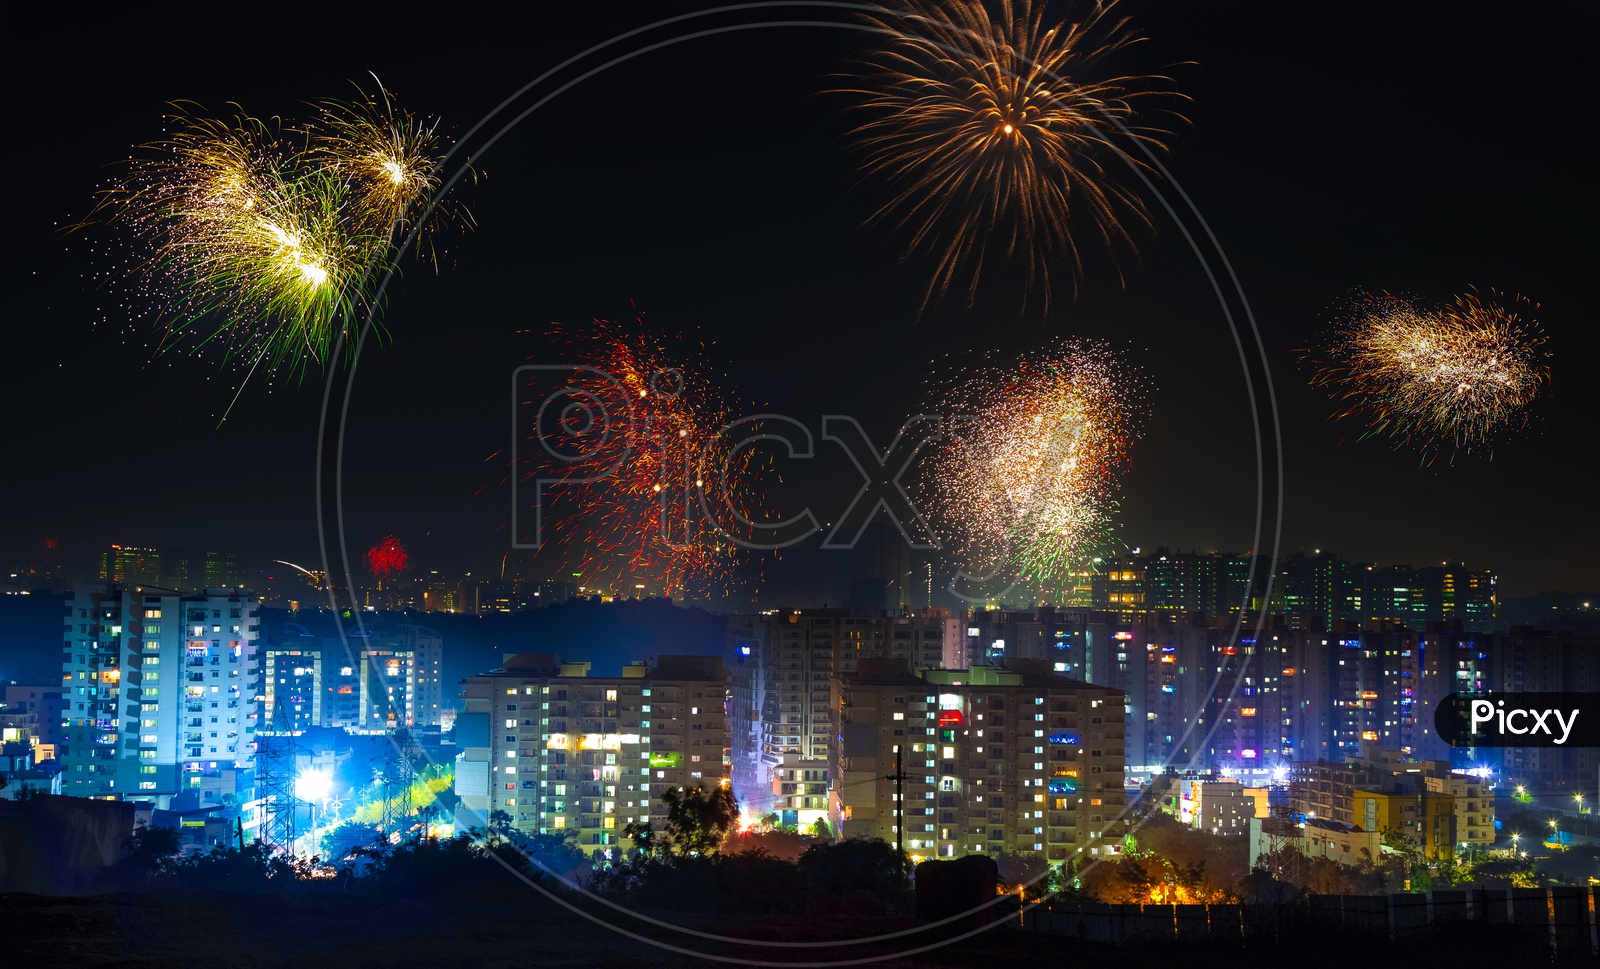 Indian Festival Diwali Deepavali Celebrations In Hyderabad with Crackers bursting in the sky on top of high rise buildings